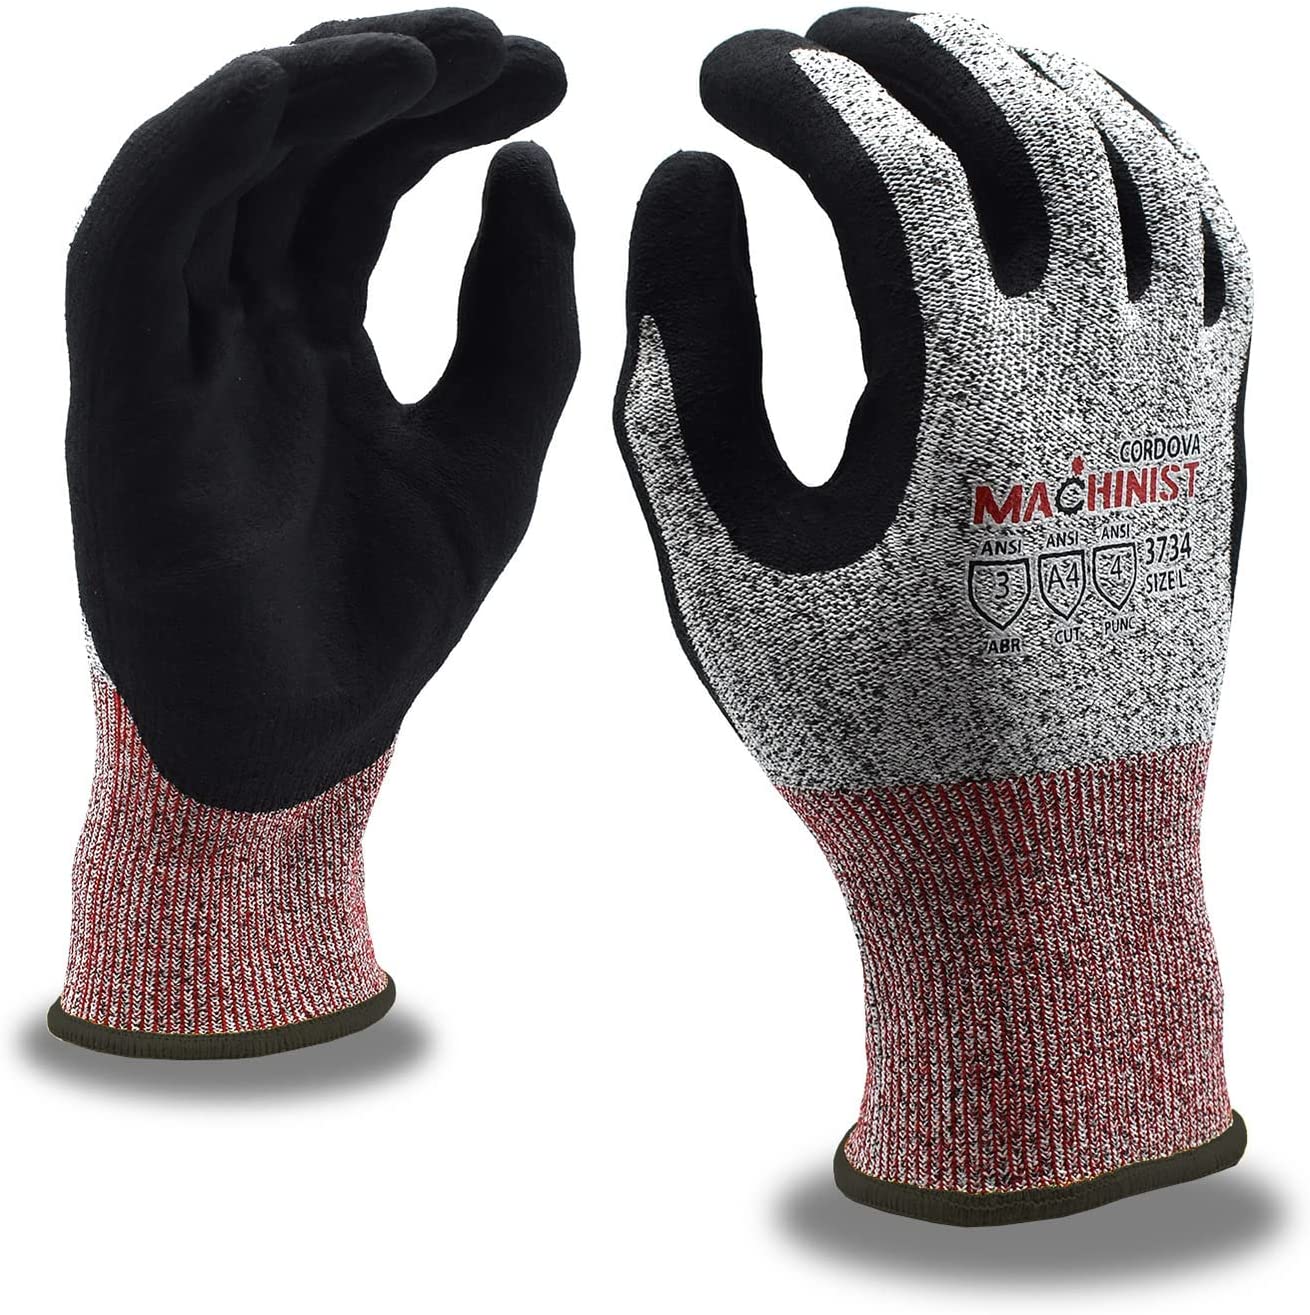 A pair of grey and black anti cut gloves are on display with "machinist" on them